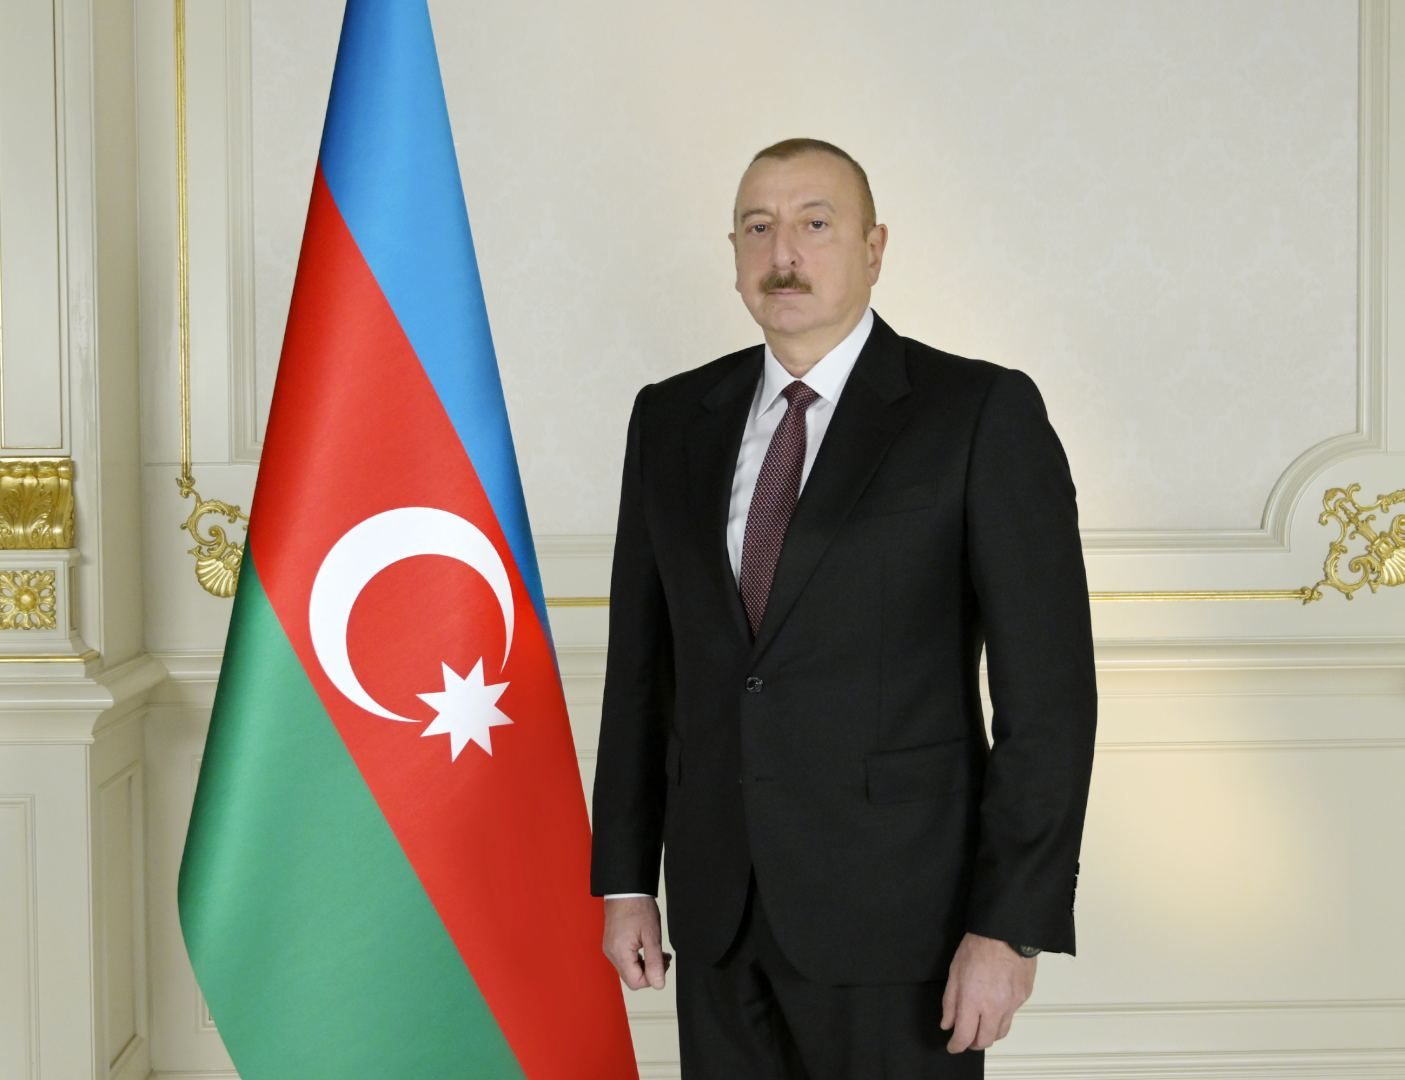 President Ilham Aliyev takes part in official reception organized in honor of participants of Ashgabat summit